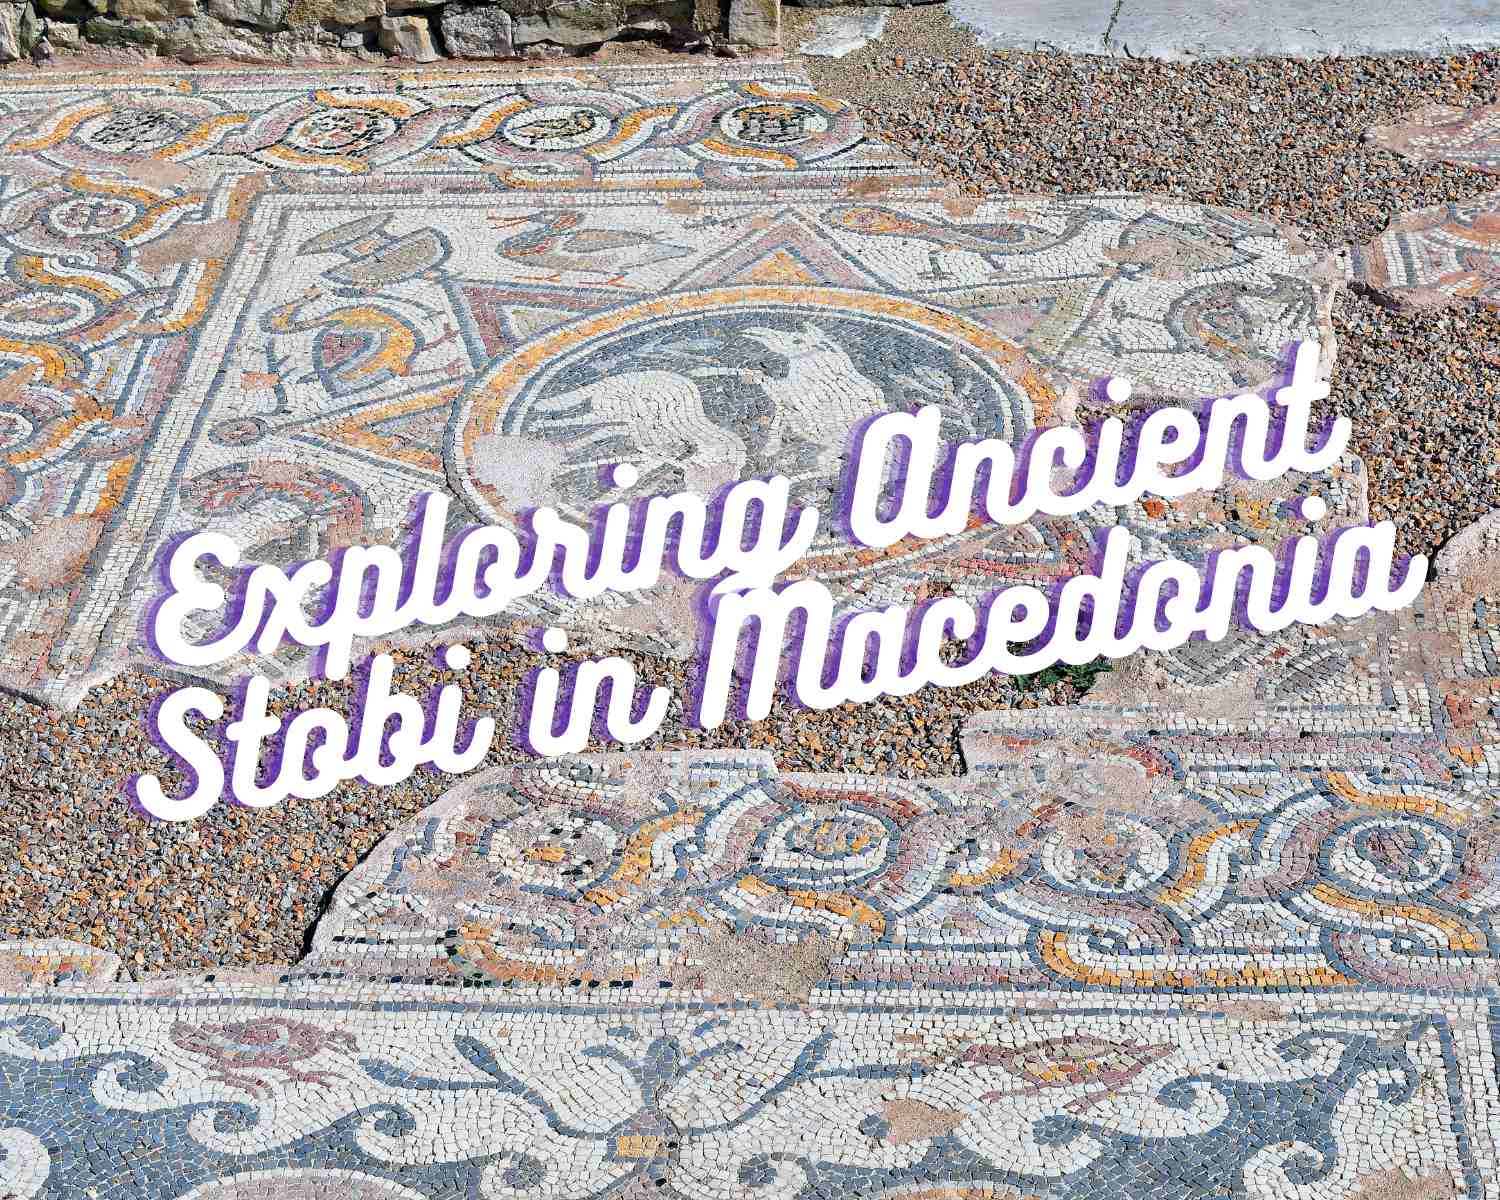 exploring the archeological site of Ancient Stobi in Macedonia